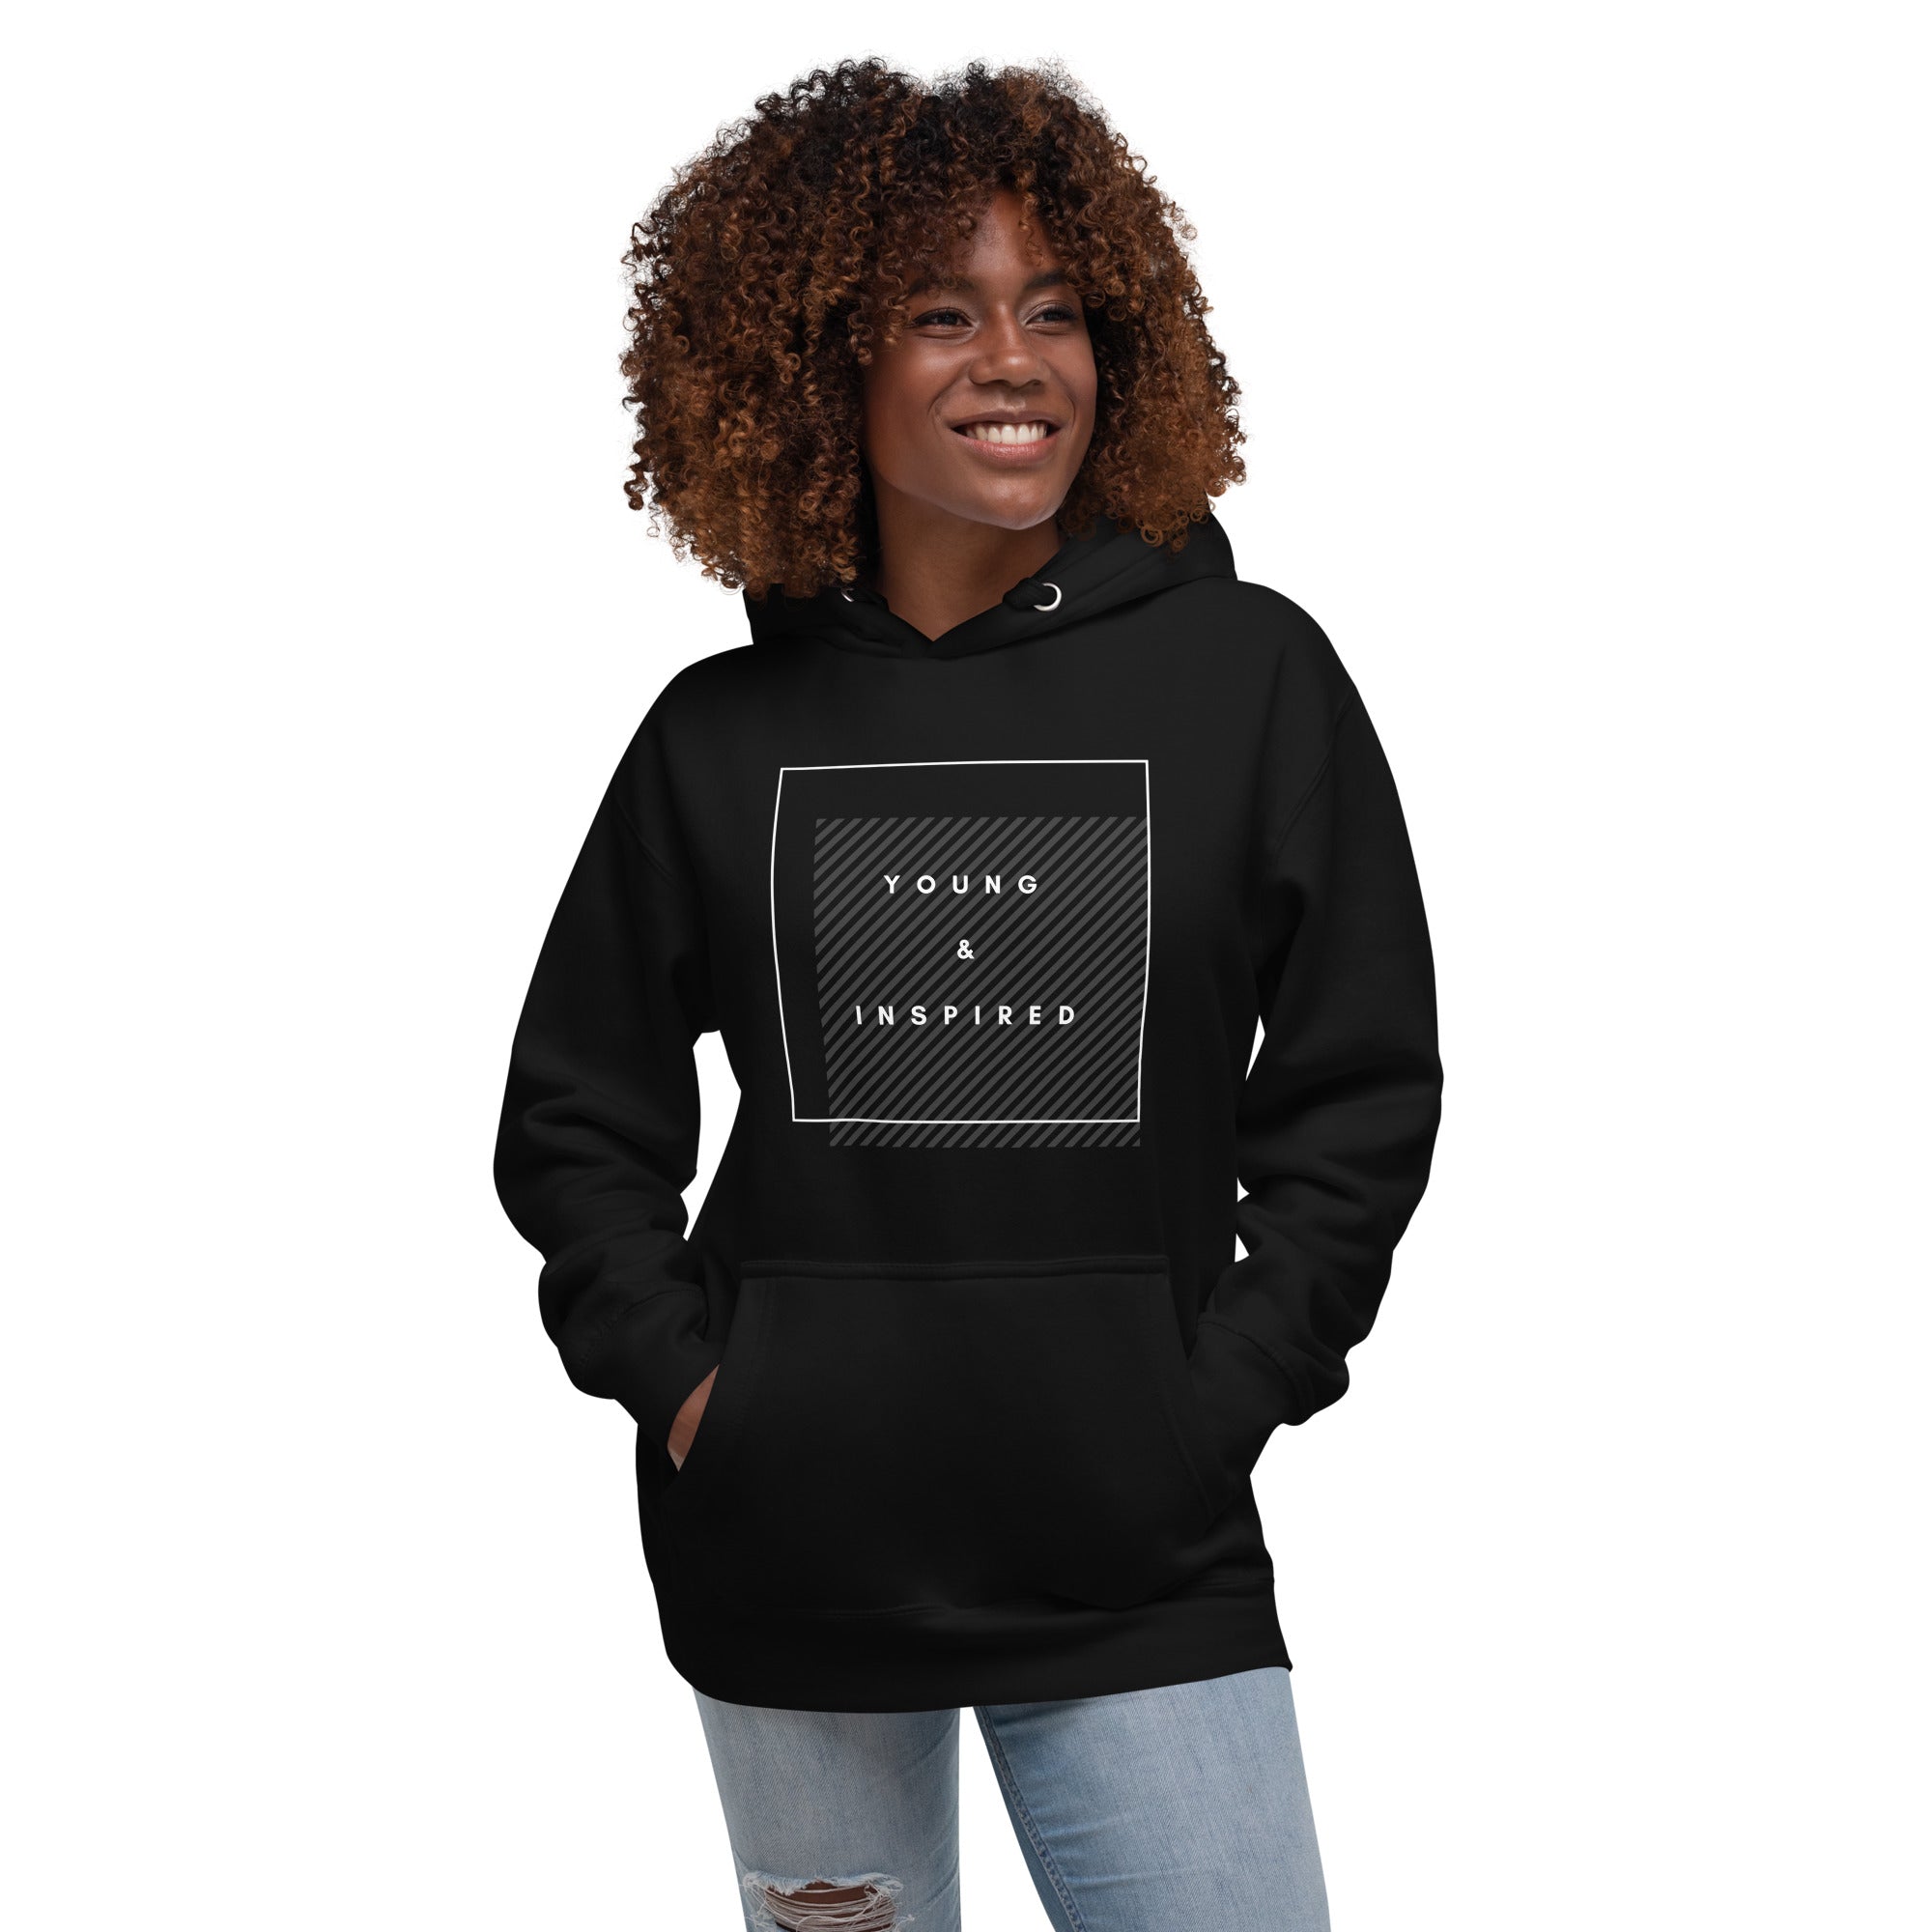 Adult Unisex Hoodie - Young & Inspired